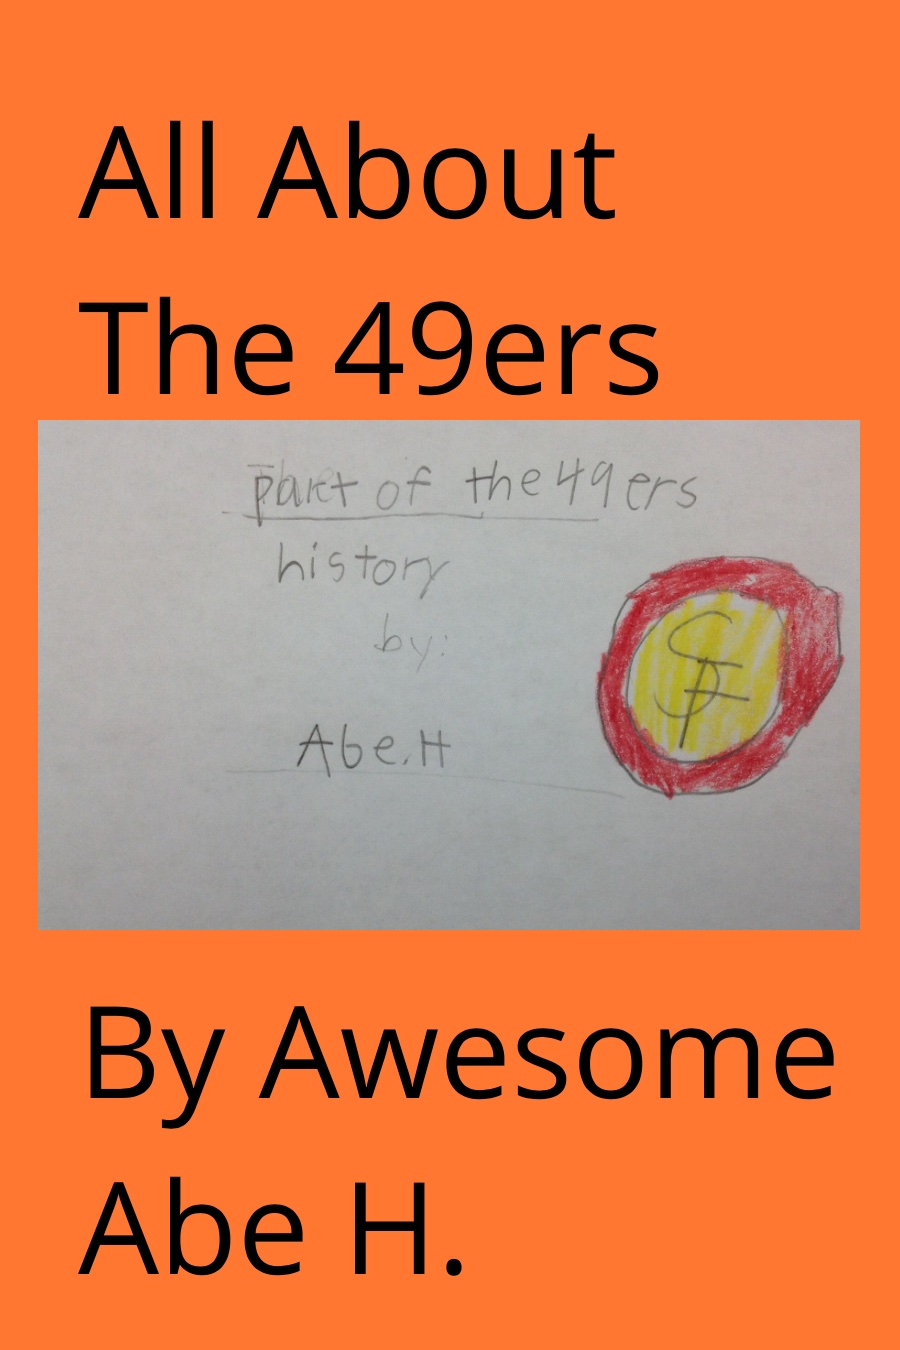 All about the 49ers by Abe H